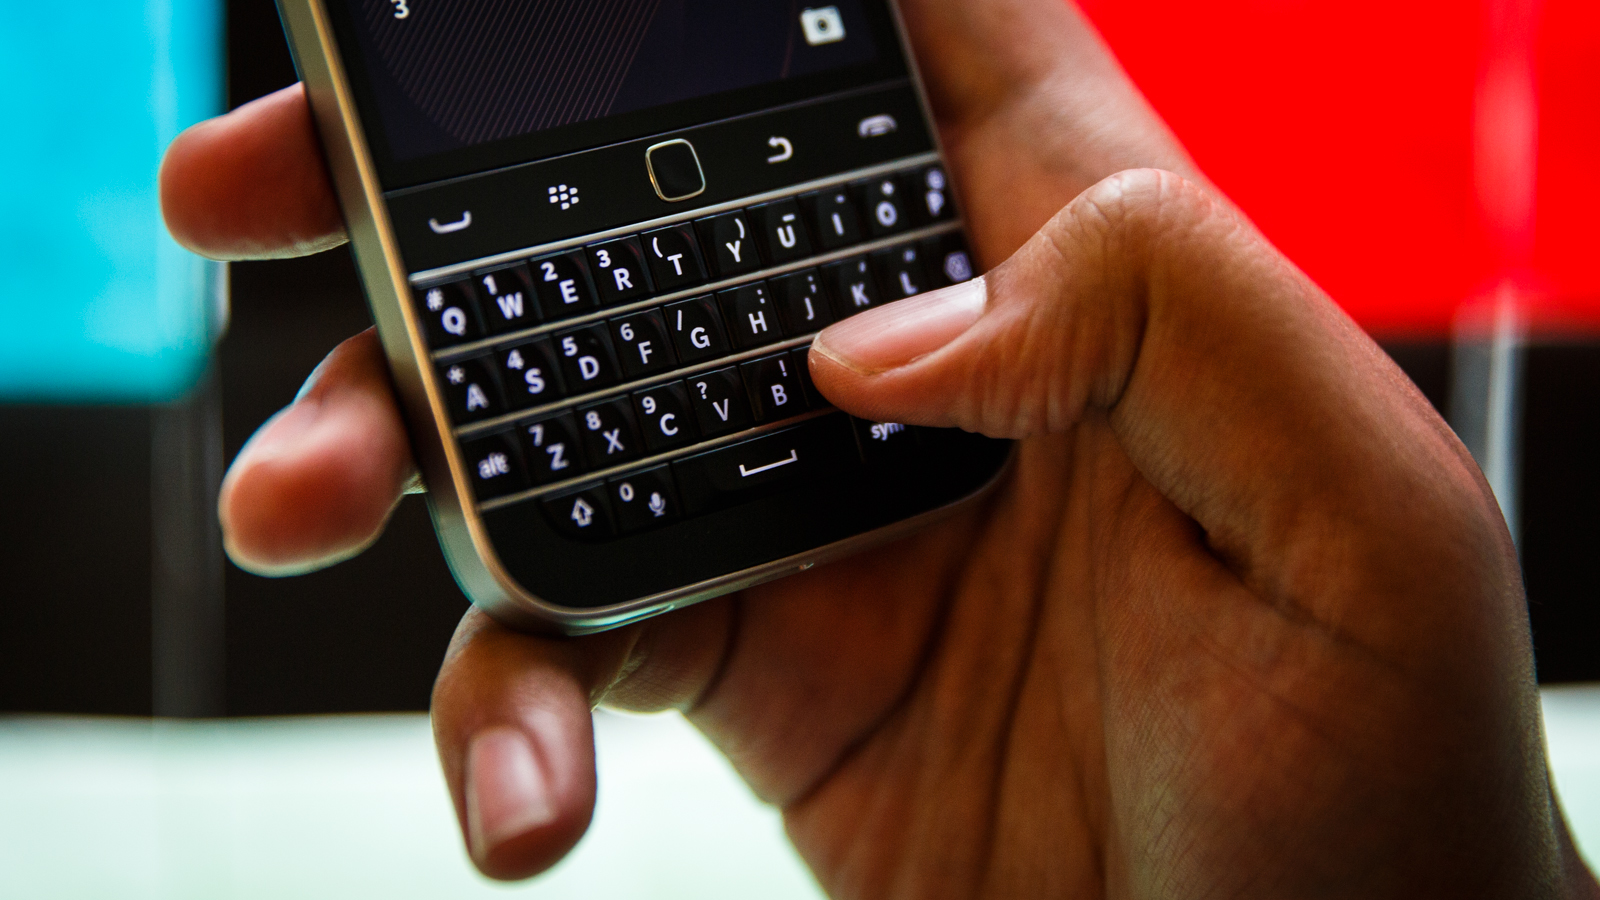 BlackBerry Classic review: BlackBerry returns to its roots - CNET